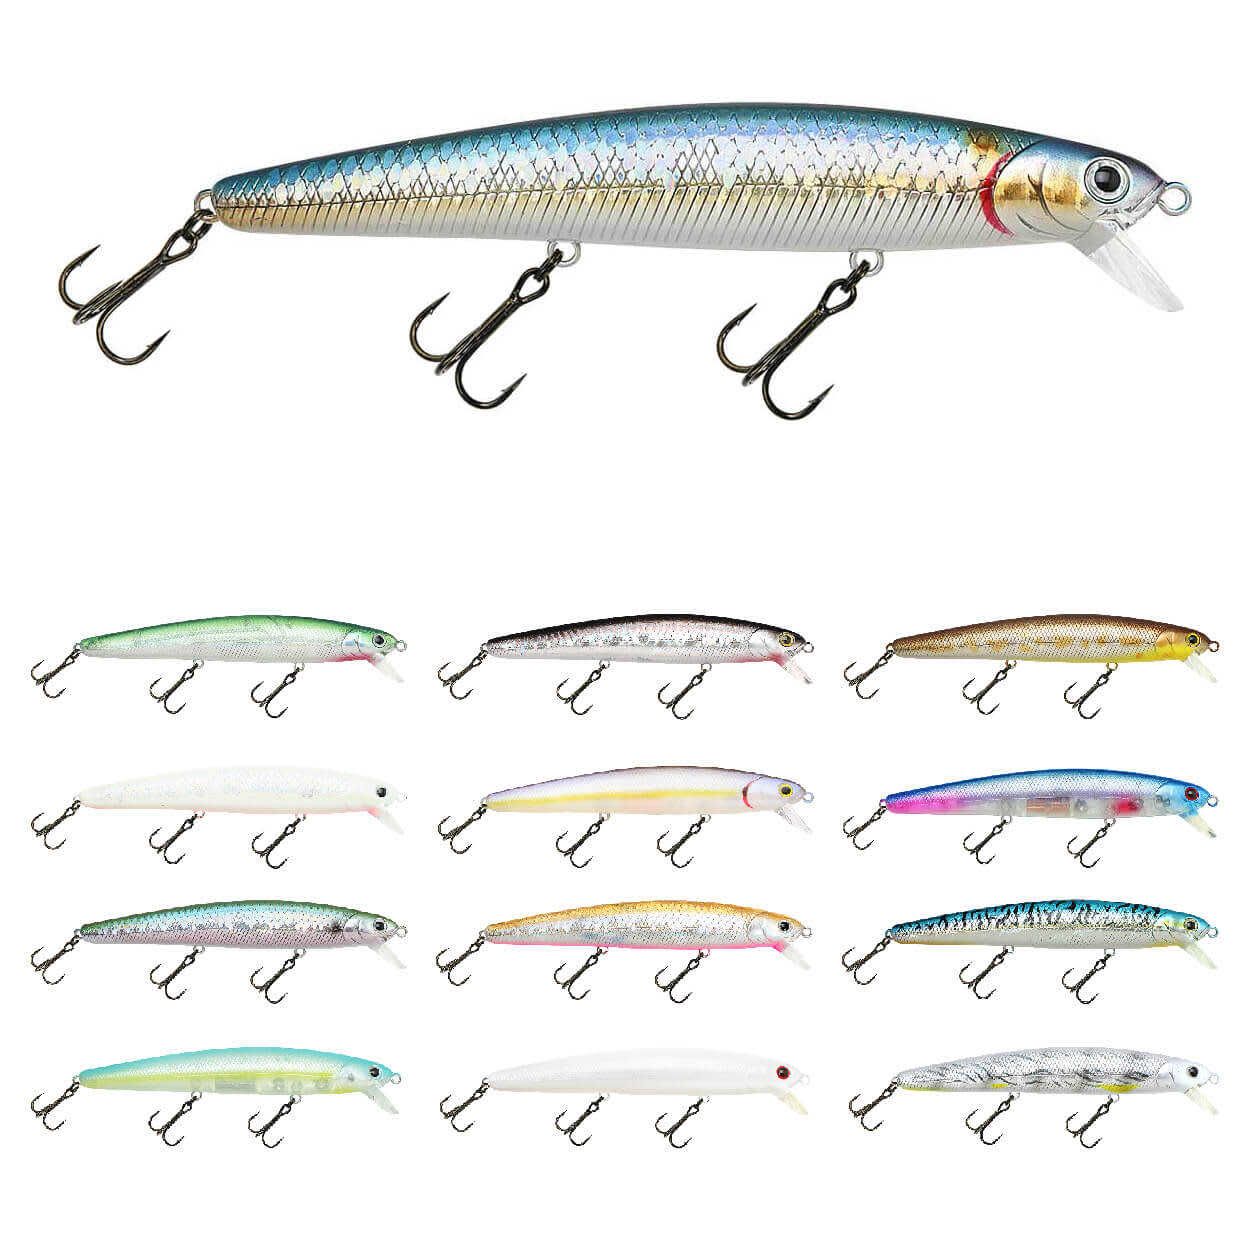 https://koeder-laden.mo.cloudinary.net/out/pictures/master/product/1/lucky-craft-sw-flash-minnow-alle-13.jpg